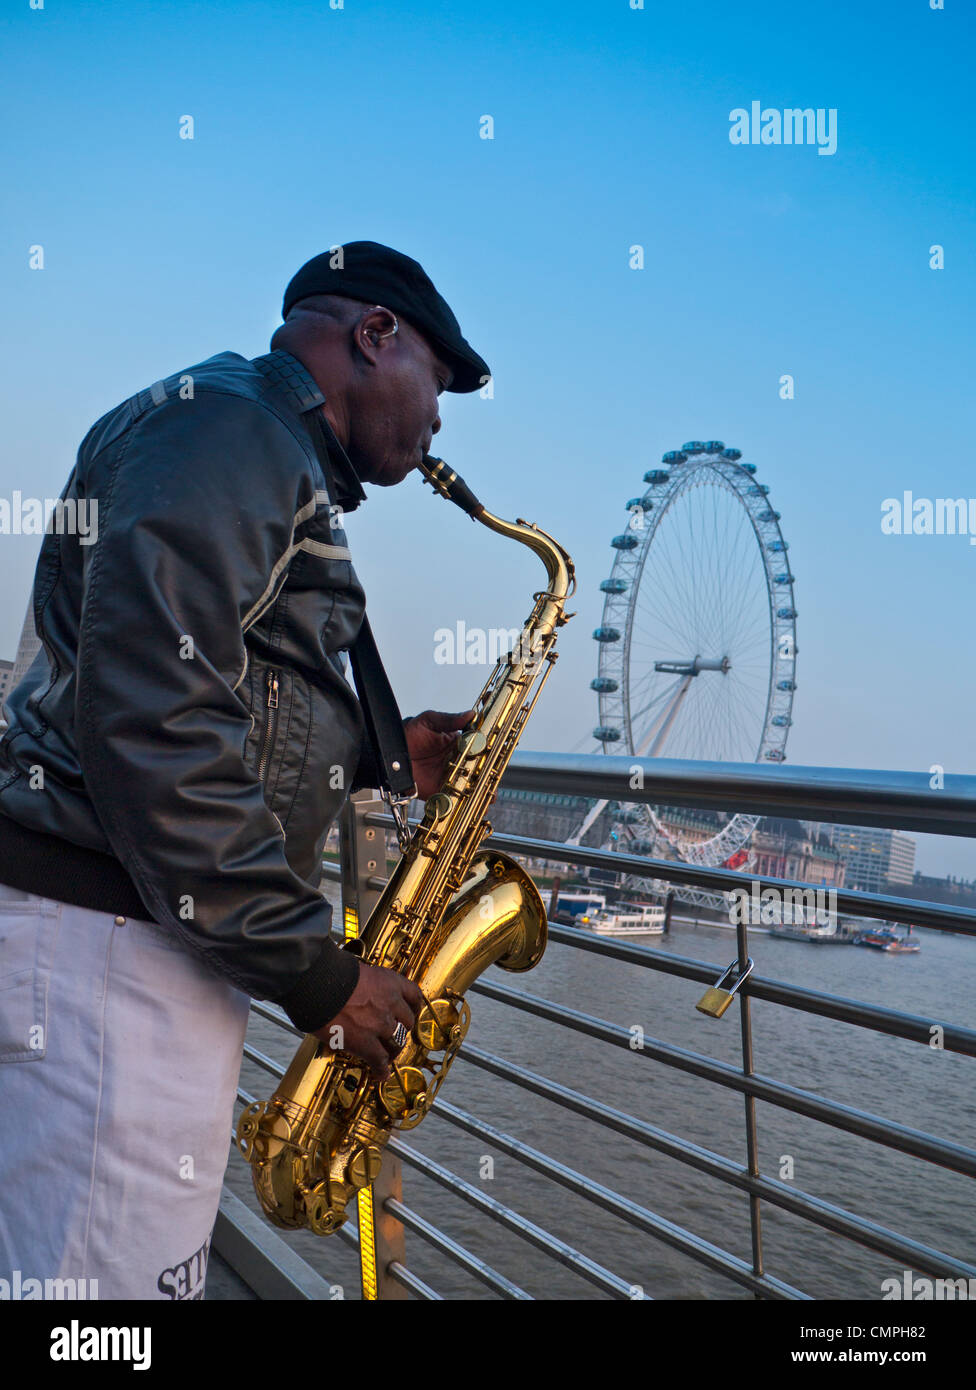 Street artist busker playing saxophone on Golden Jubilee Bridge at dusk with River Thames and London Eye in background London UK Stock Photo